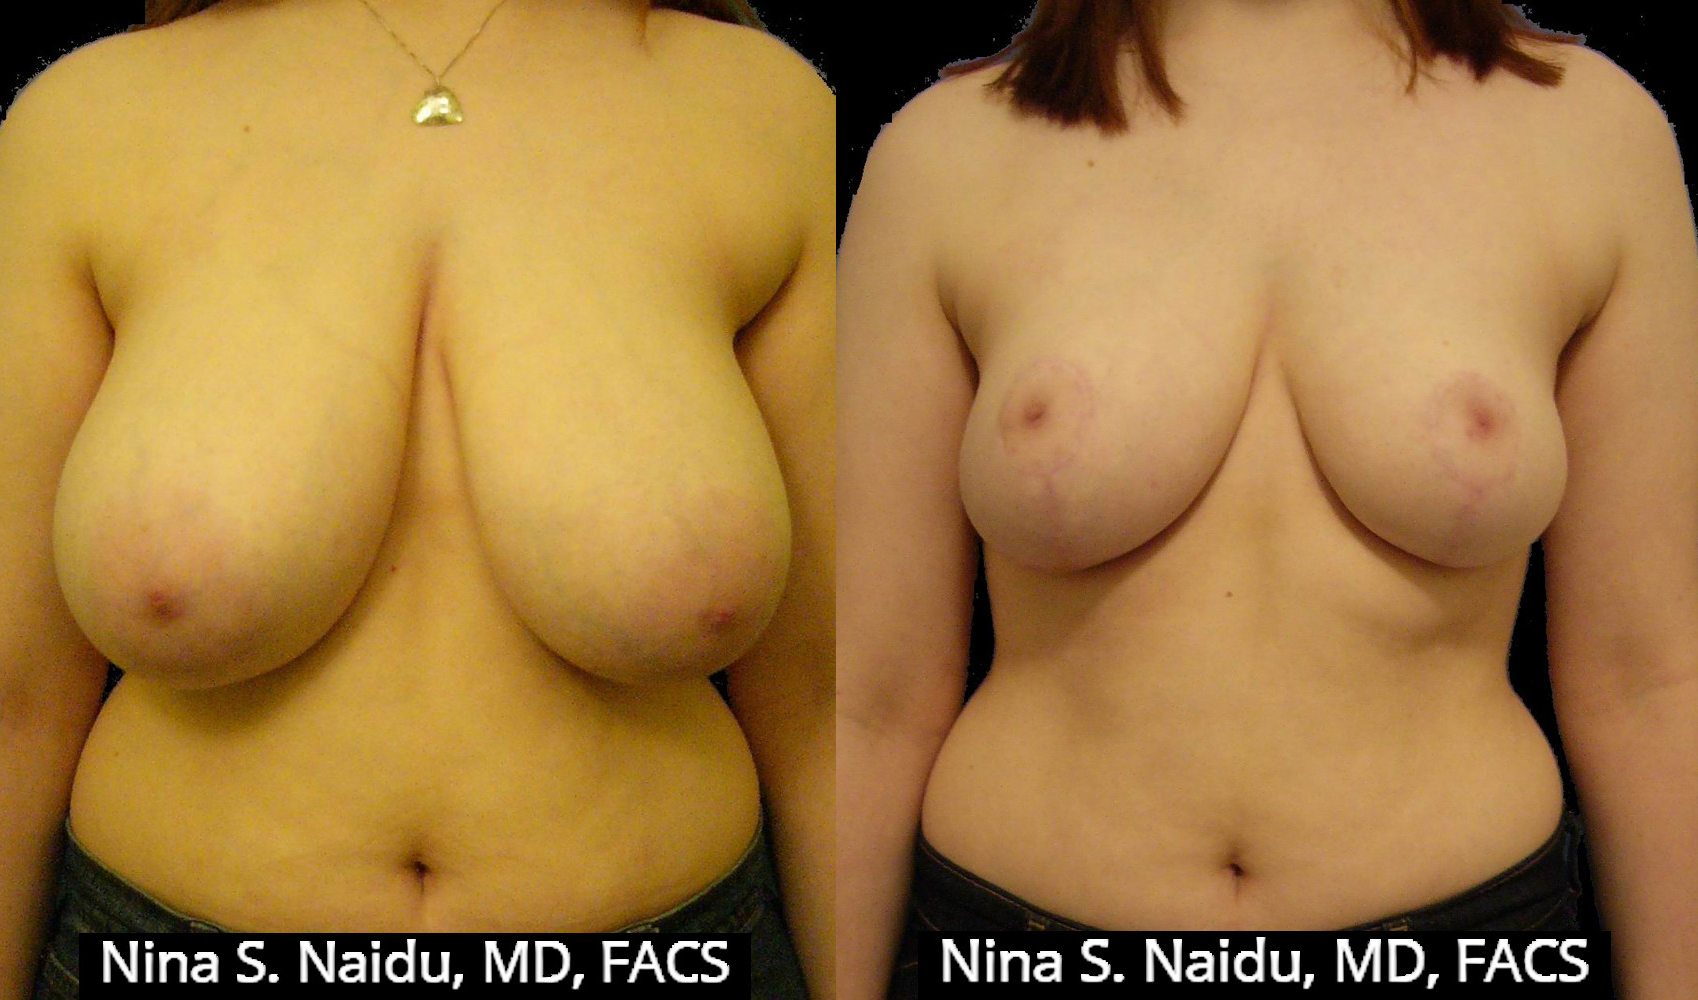 breast-reduction-before-and-after-pics-jap-handjob-videos